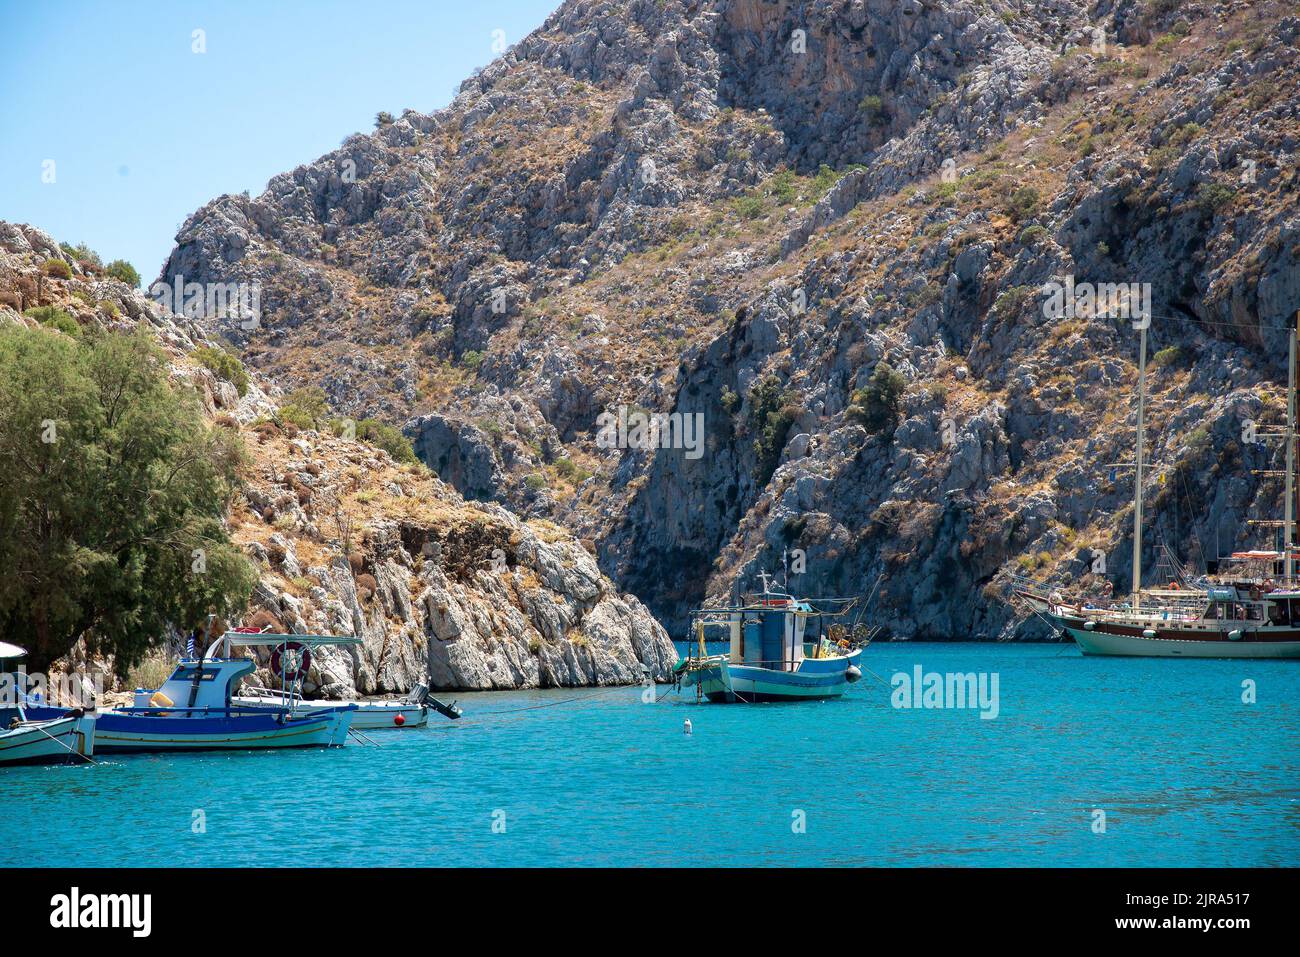 Boats in the harbour at Vathis, Kalymnos, Dodecanese, Greece, South Aegean. Stock Photo